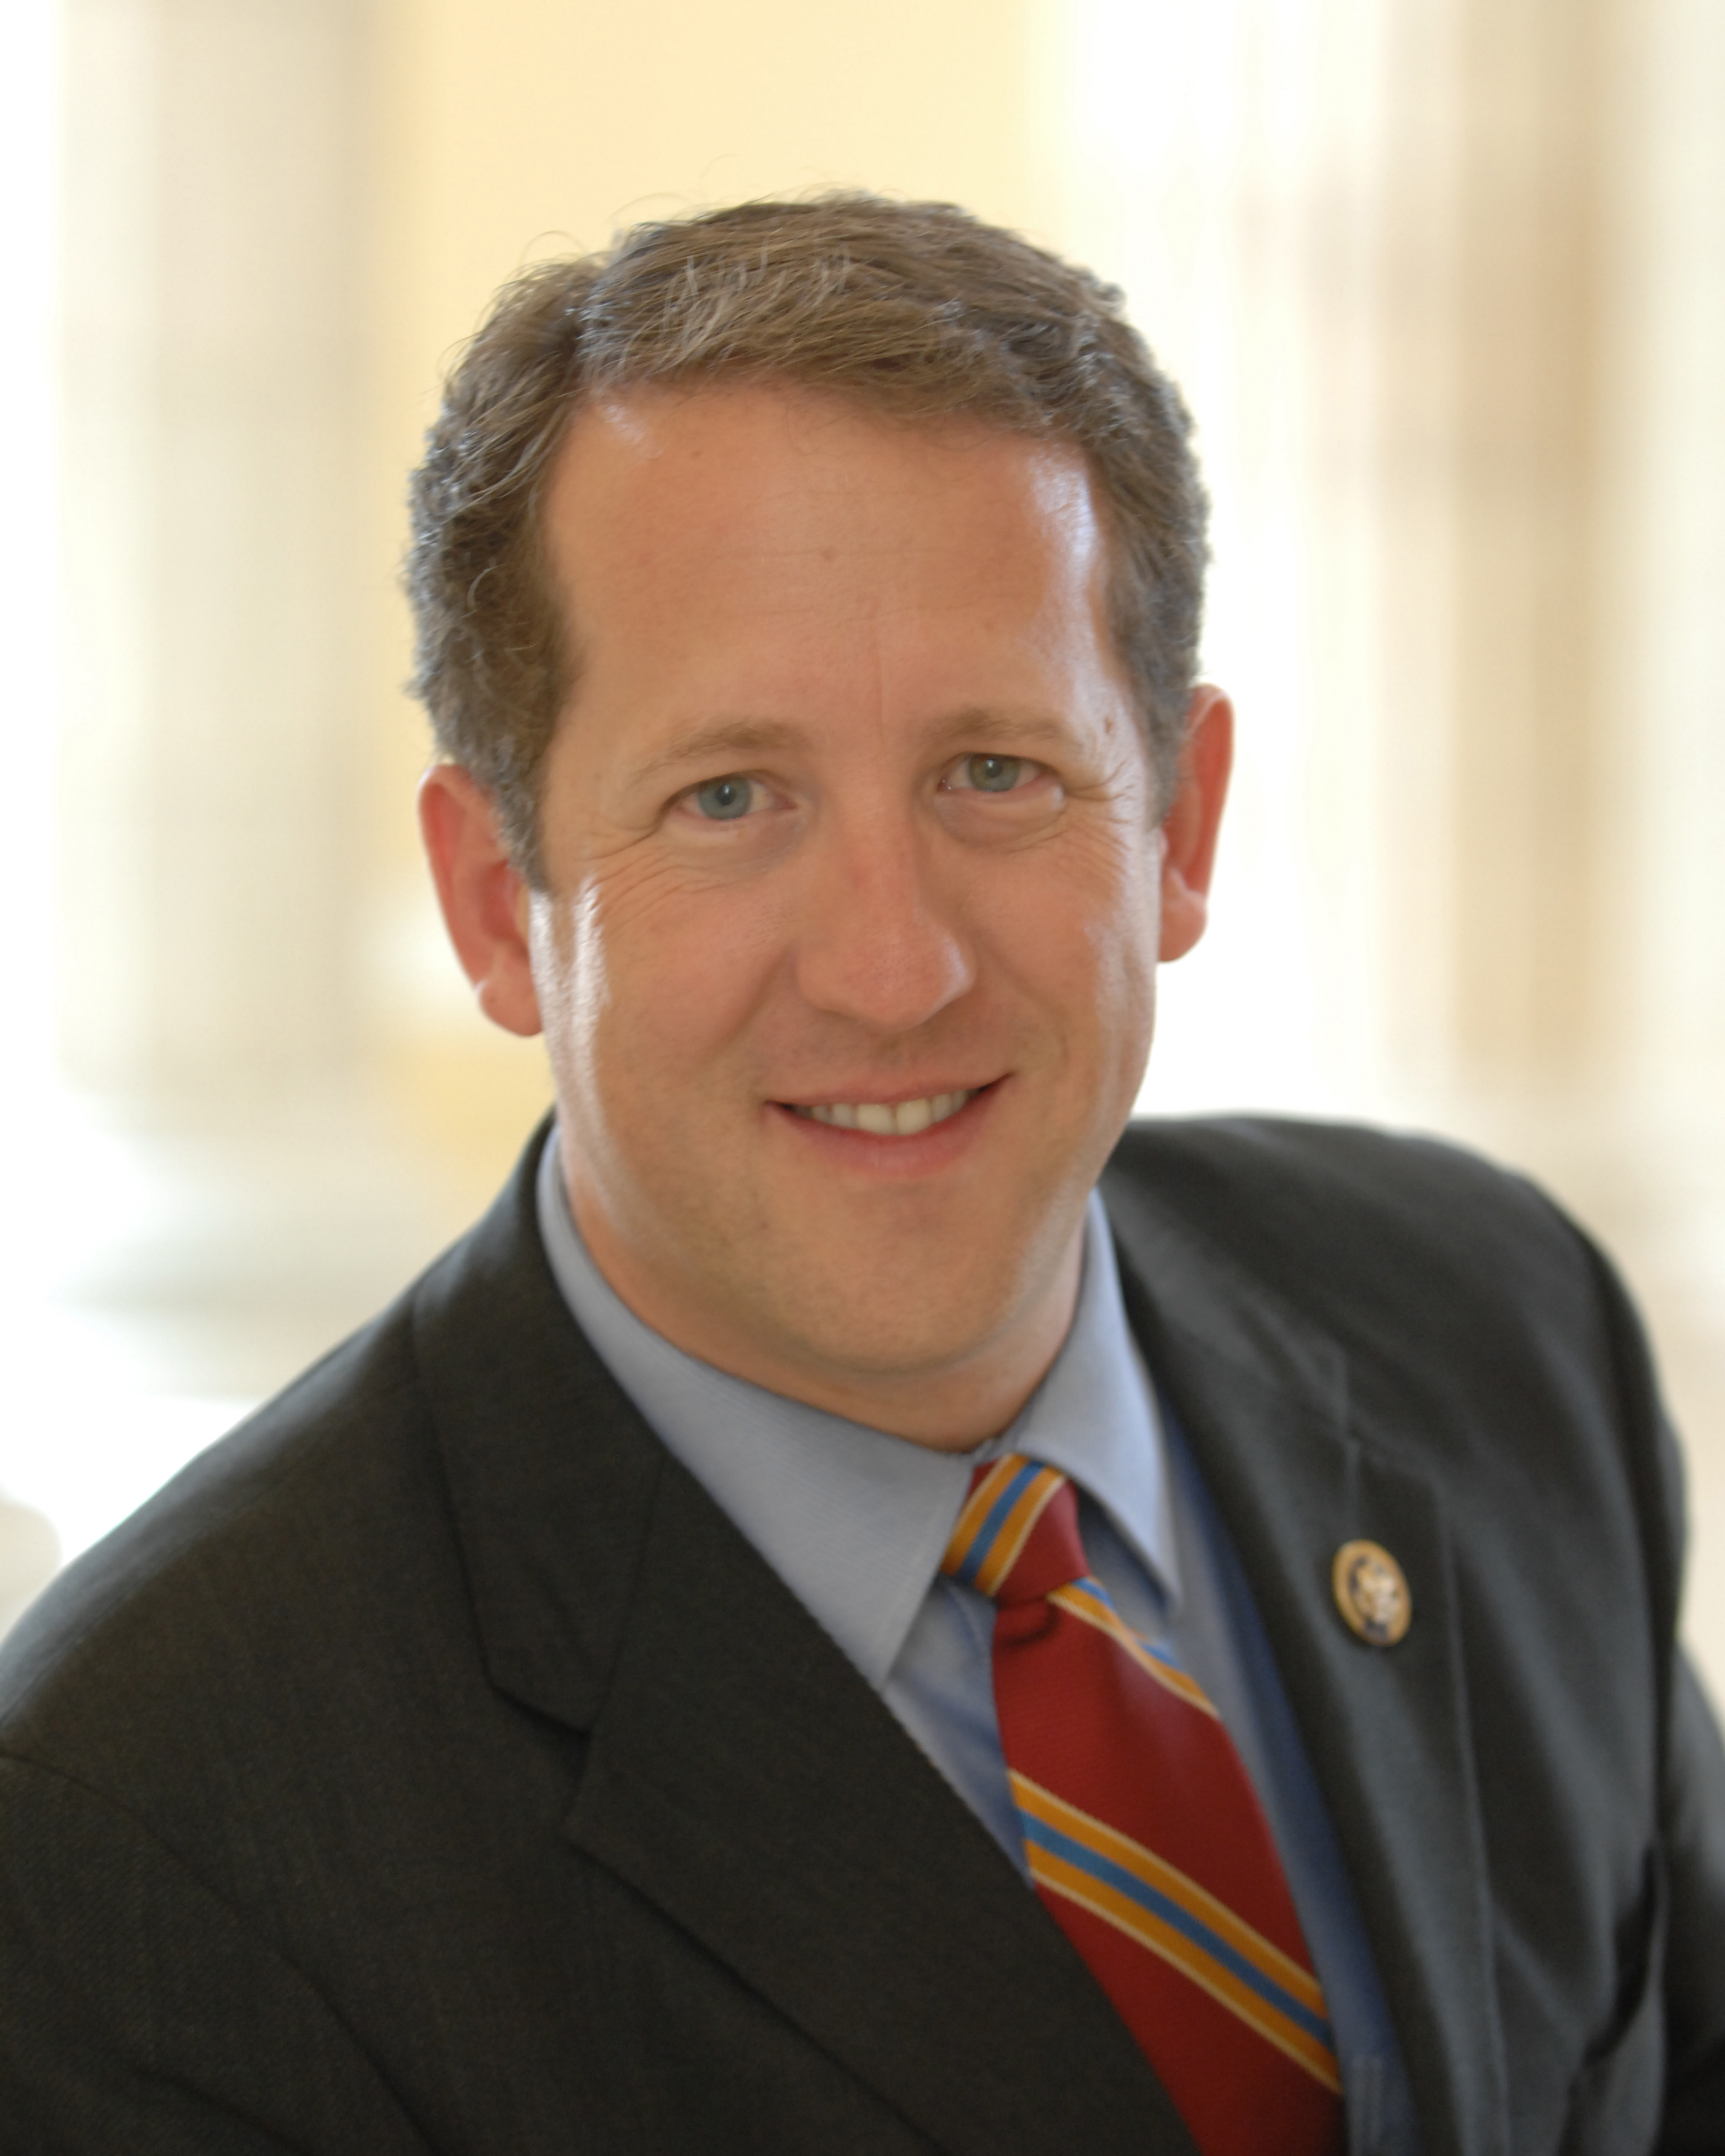 Congressman Adrian Smith will deliver commencement remarks May 5 to the Class of 2022 at the University of Nebraska's College of Technical Agriculture in Curtis.